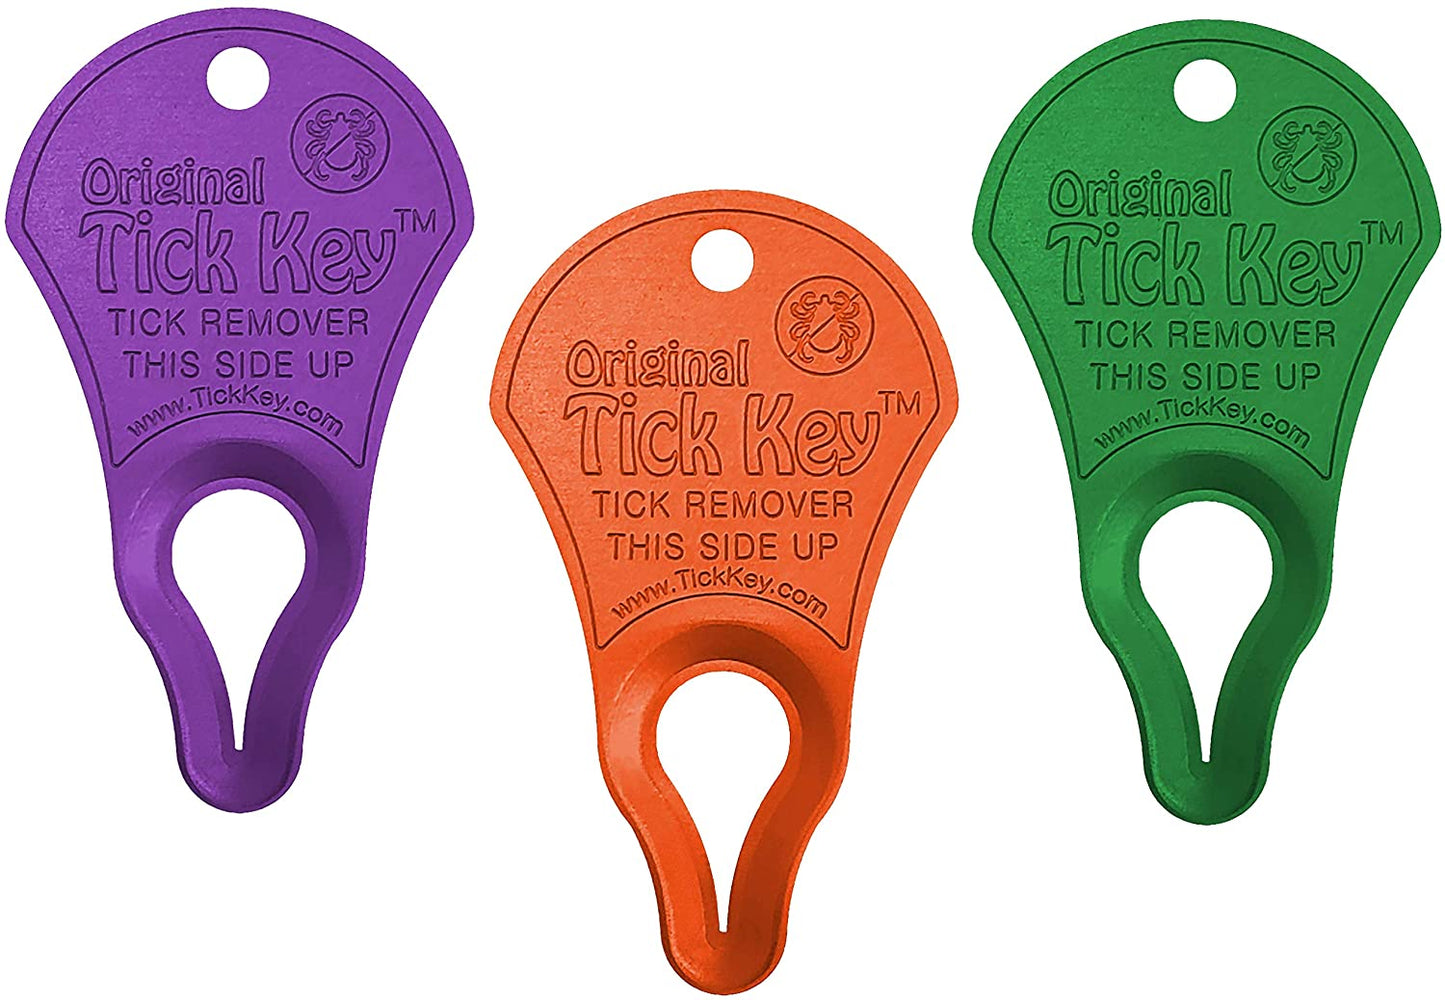 Original Tick Key for Tick Removal 3 Pack (Multi Color) - (For 8 piece(s))